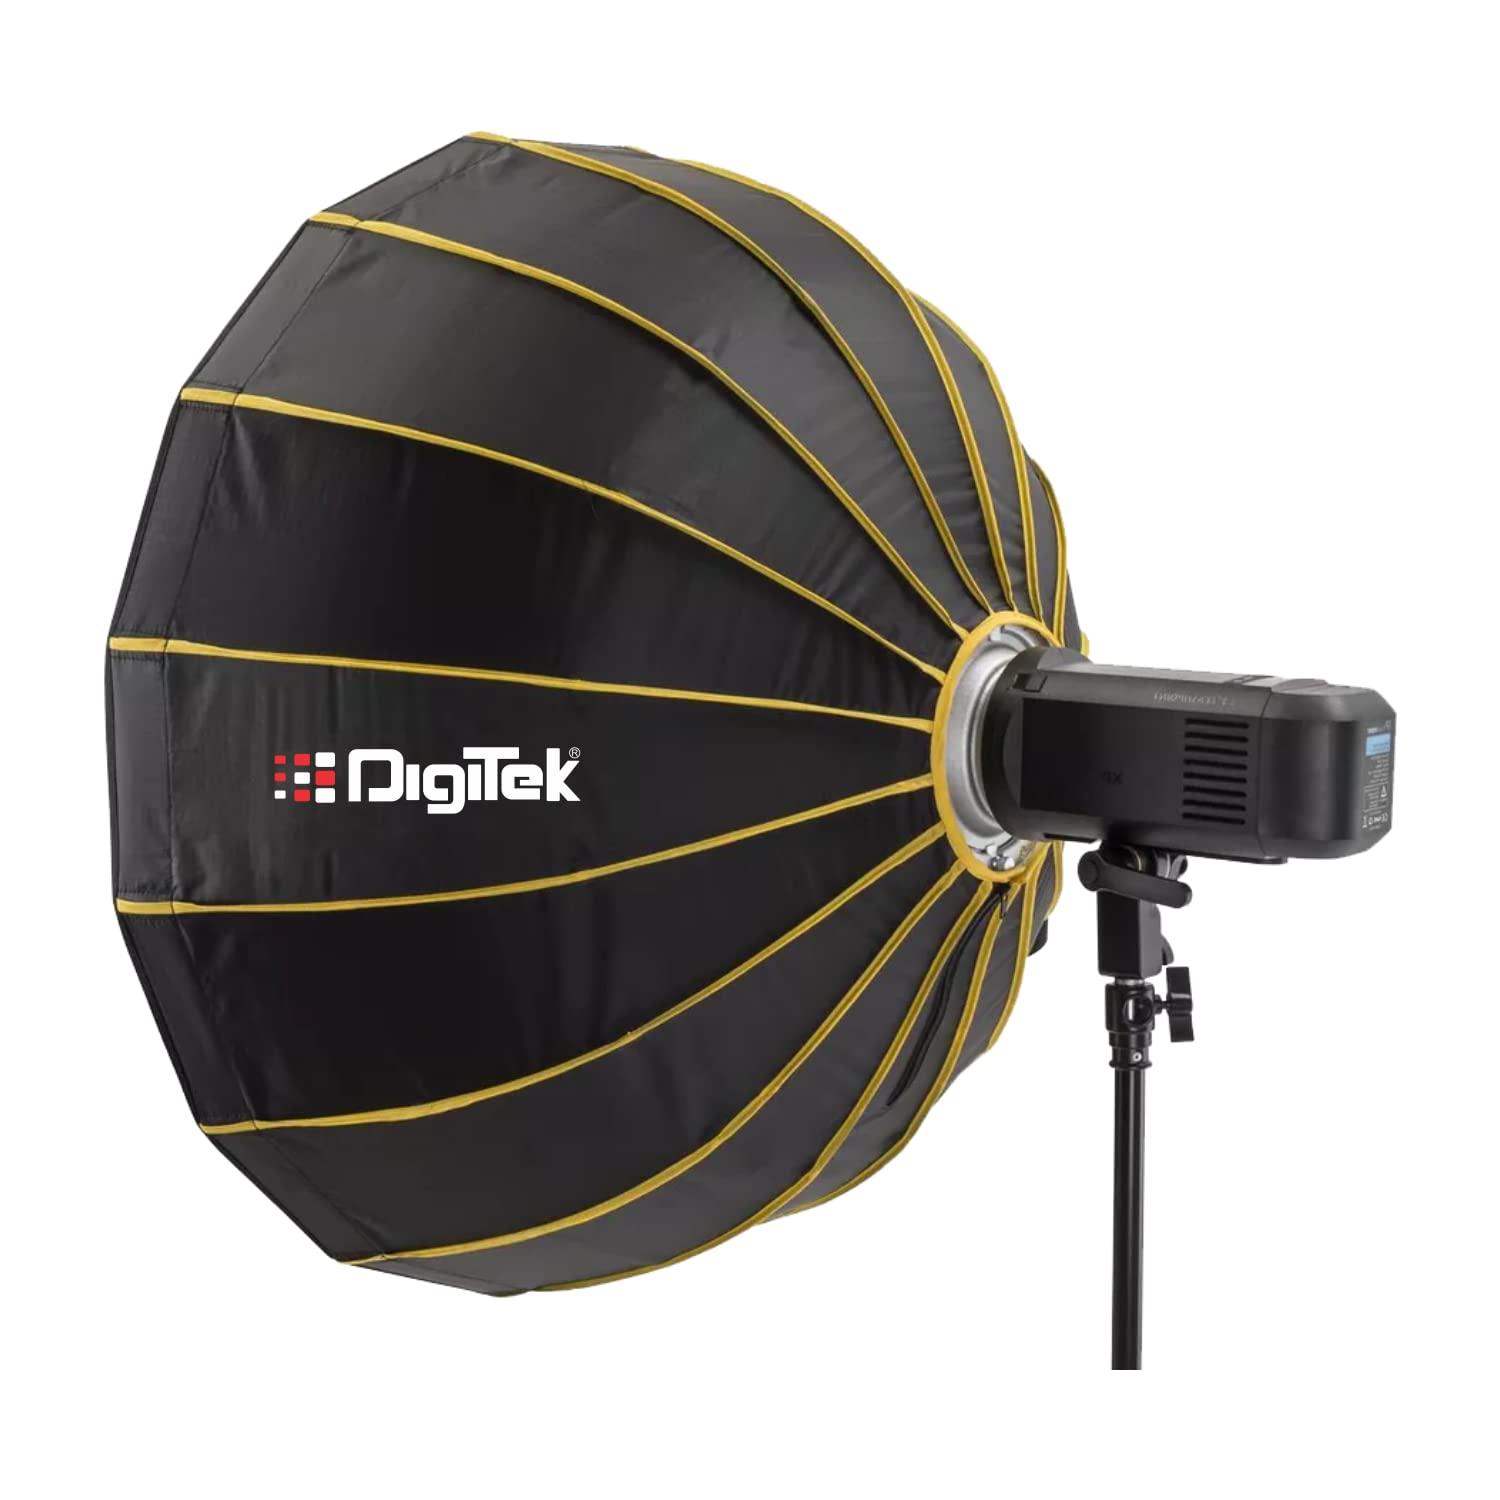 Digitek (DBDS-85S) 85cm Beauty Dish Softbox DBDS-85S, Collapsible, Transportable, Lightweight Bowen Mount for Photography & Studio Lighting with Removable Diffuser - Digitek